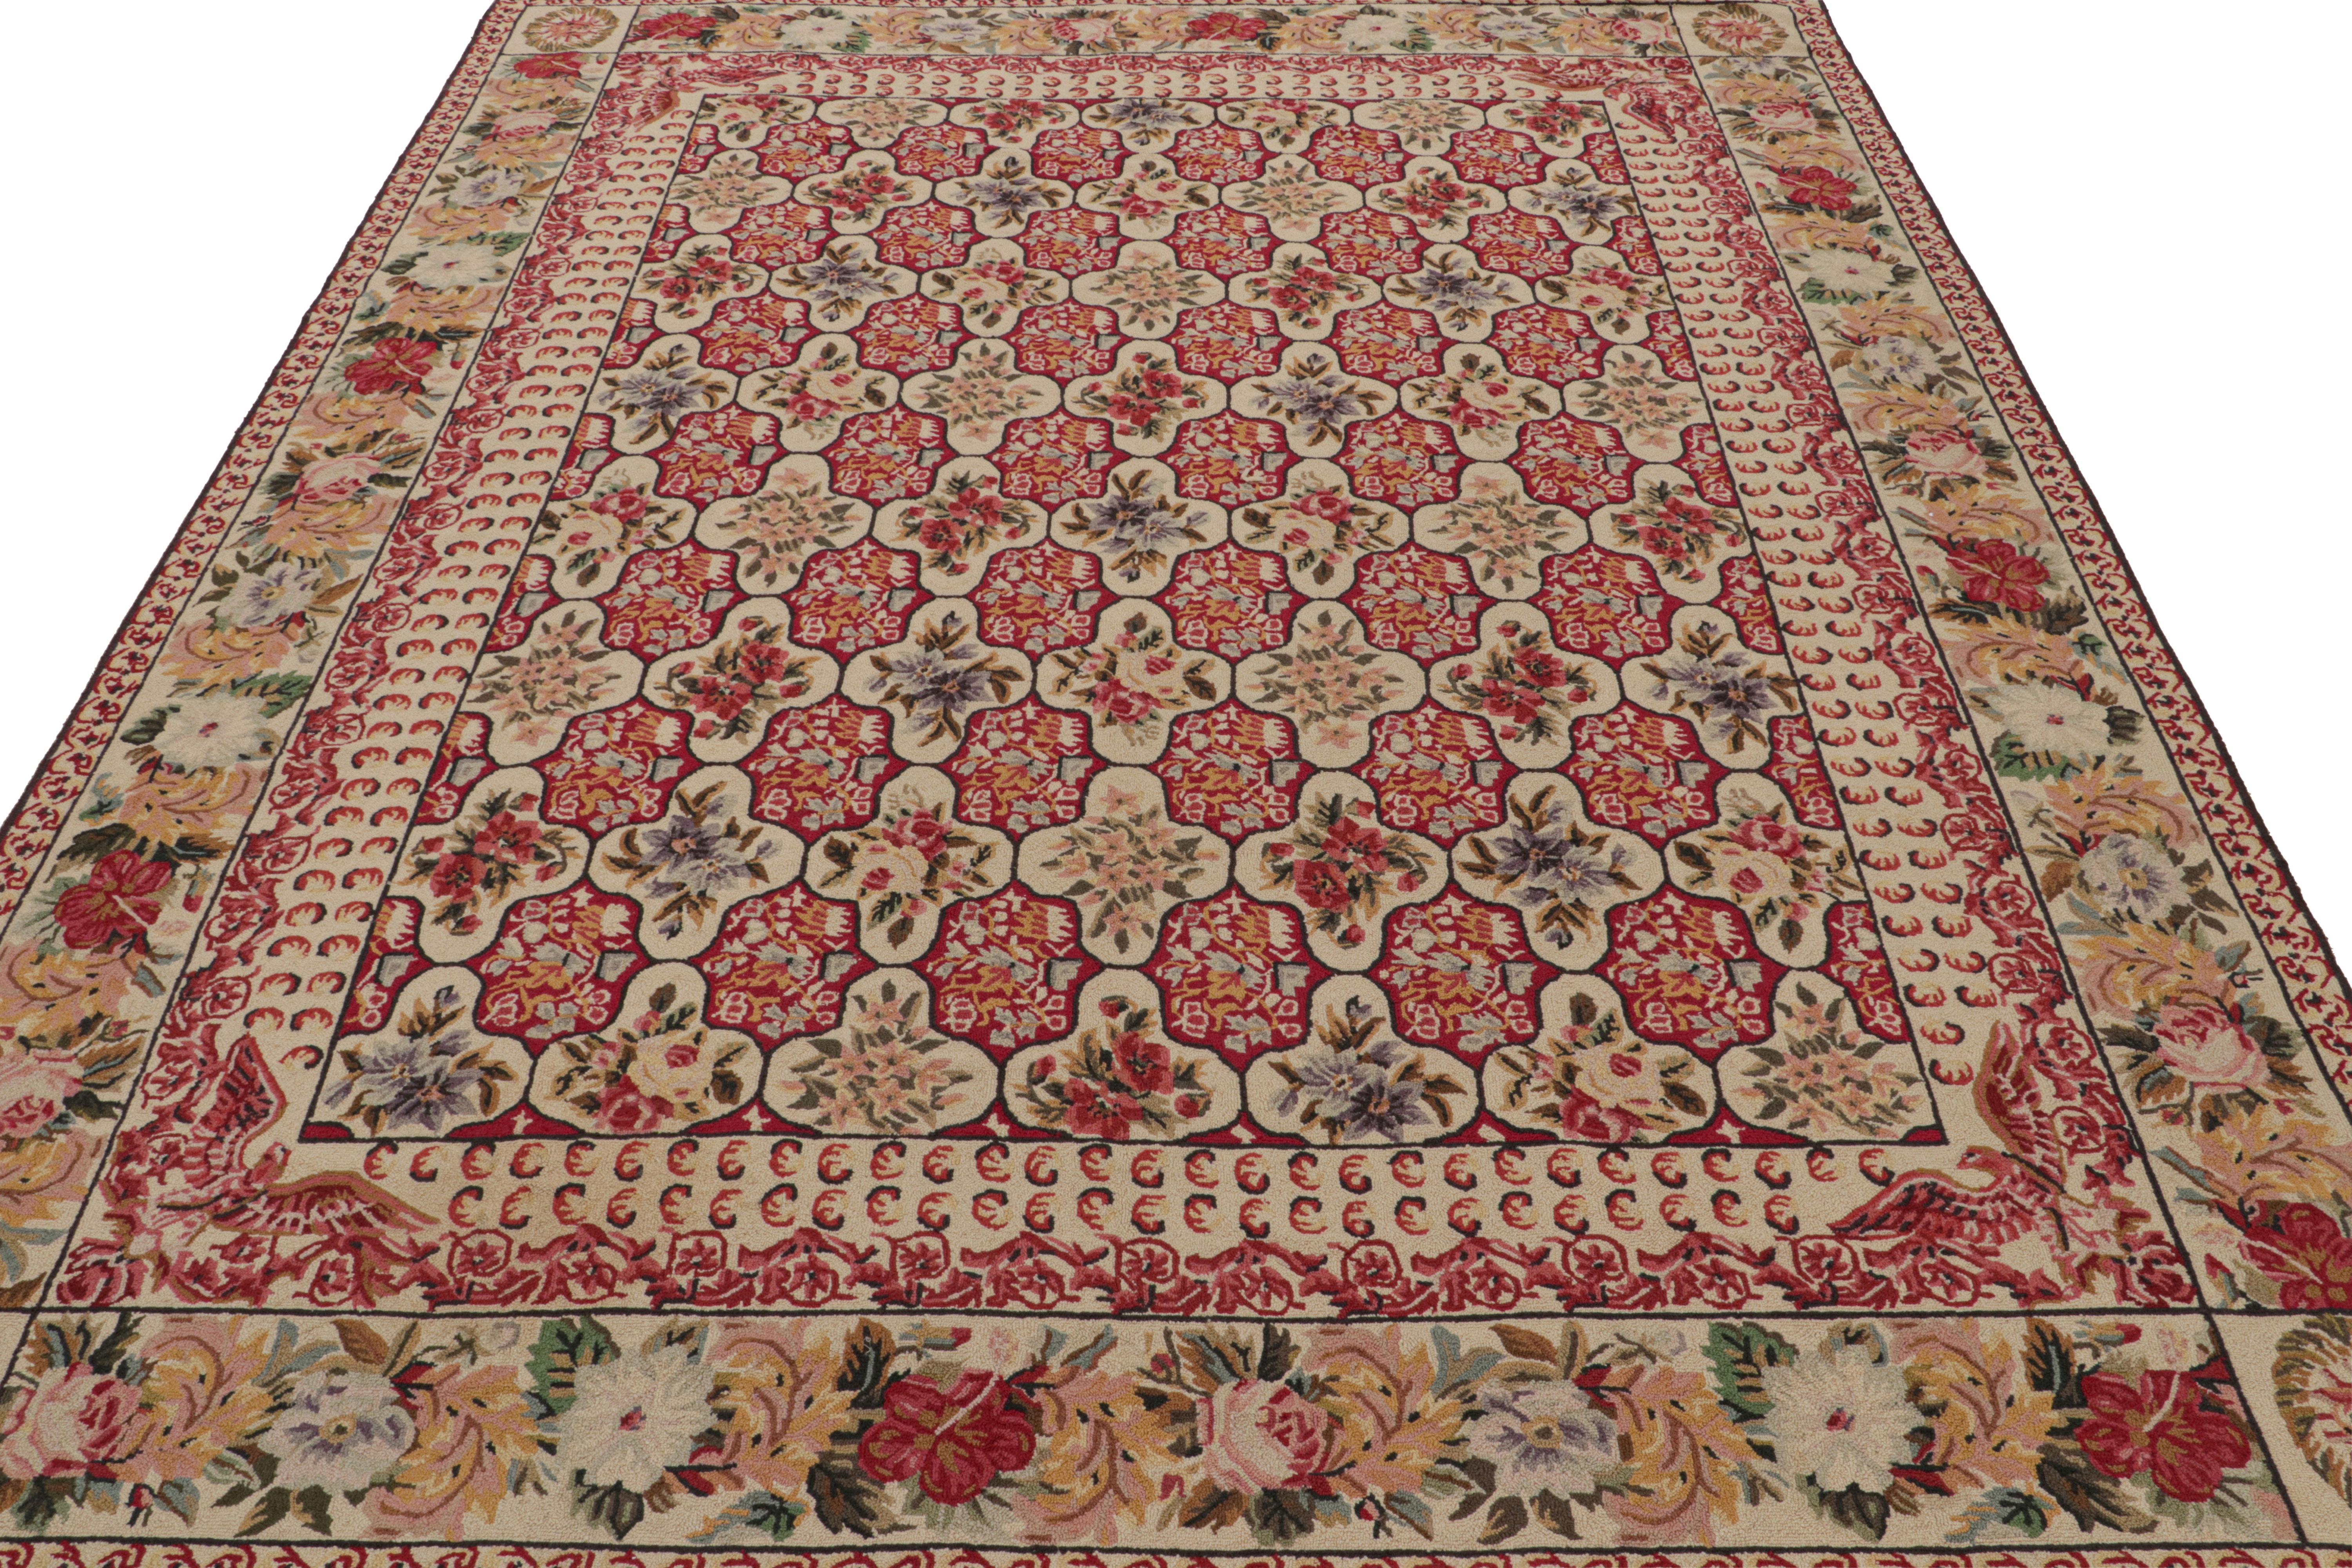 American Rare Antique Hooked Rug with Red & Beige Floral Patterns, from Rug & Kilim For Sale